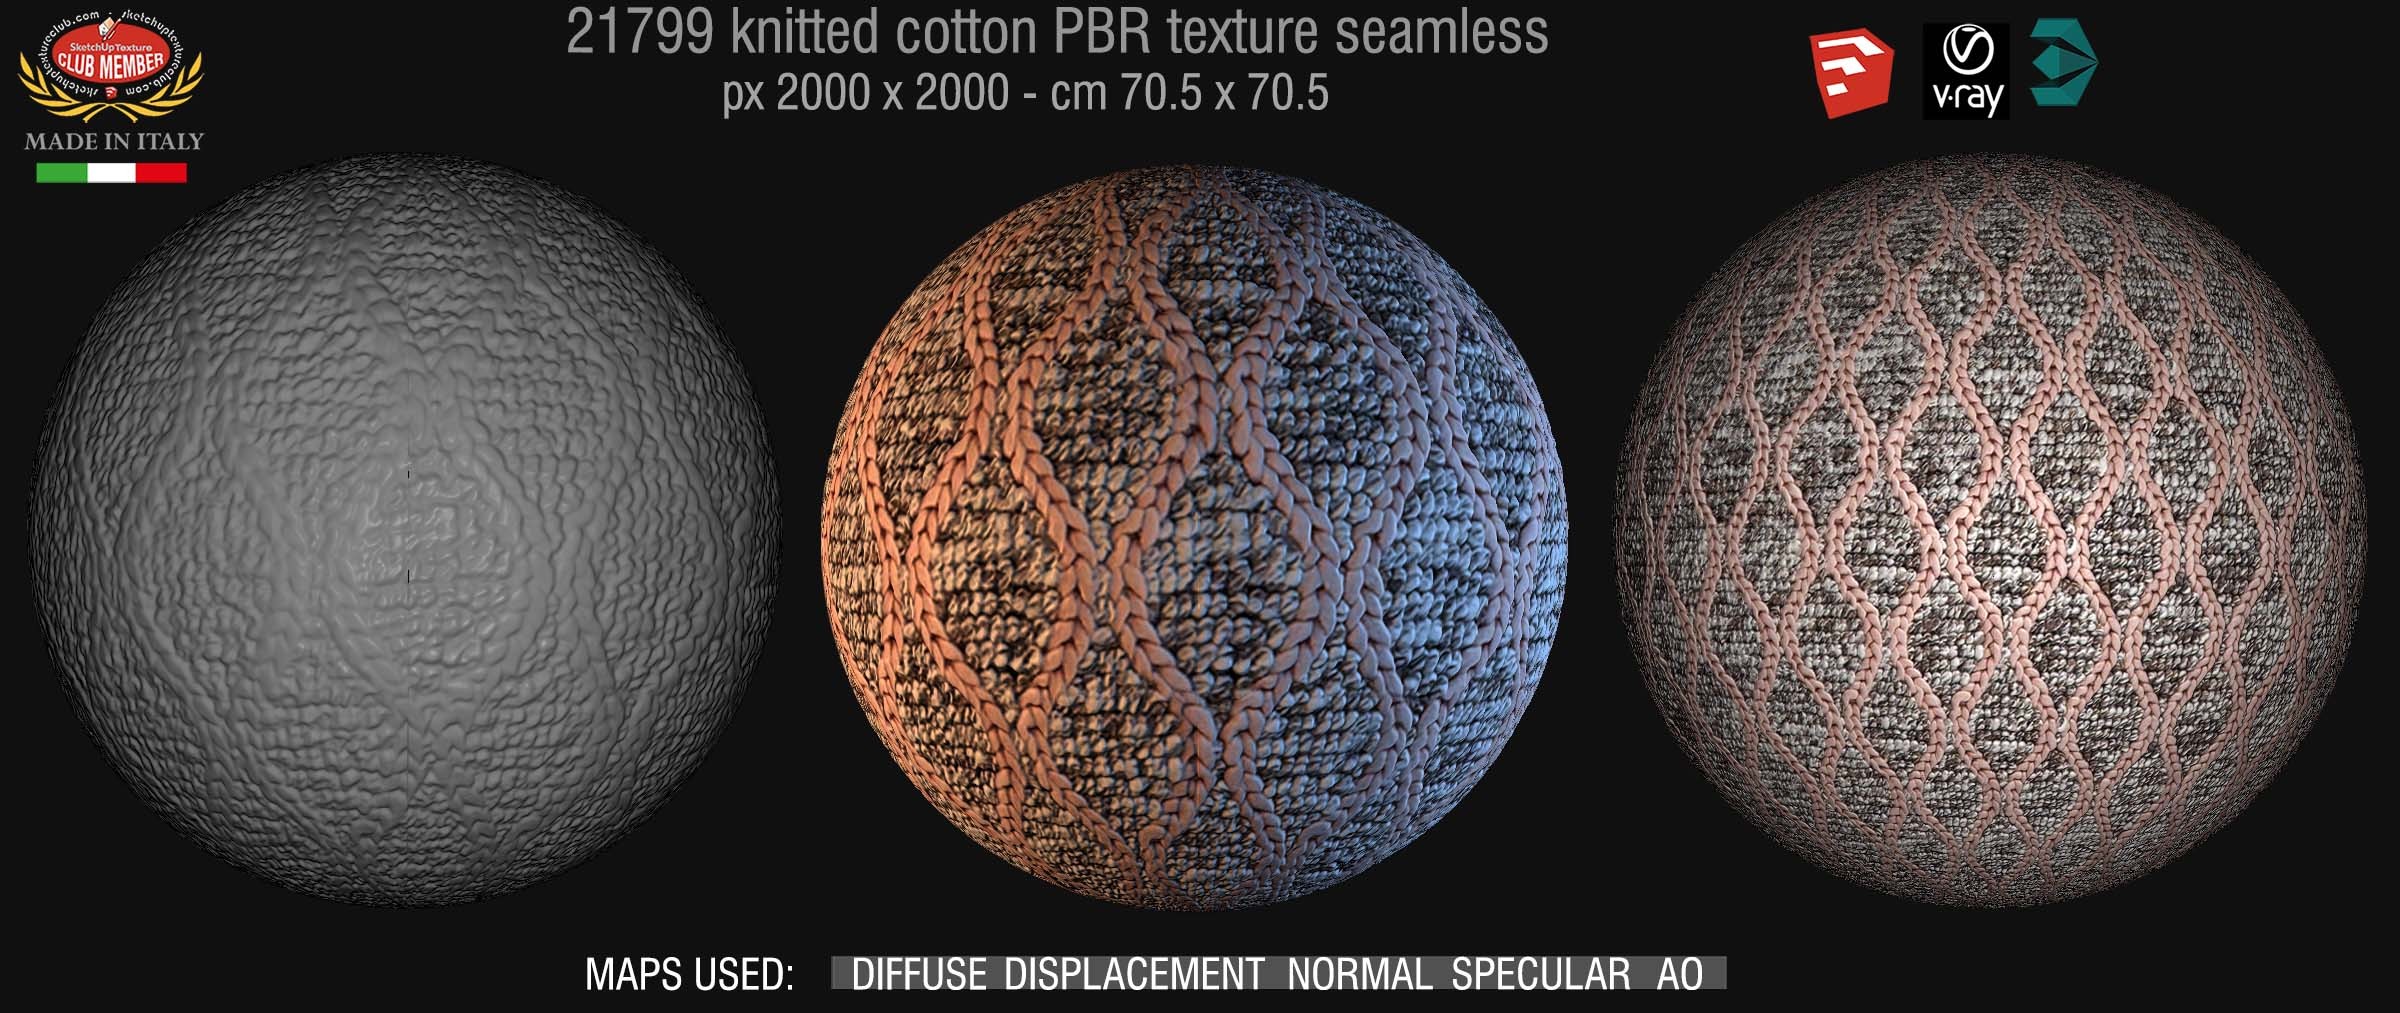 21799 knitted cotton PBR textures seamless